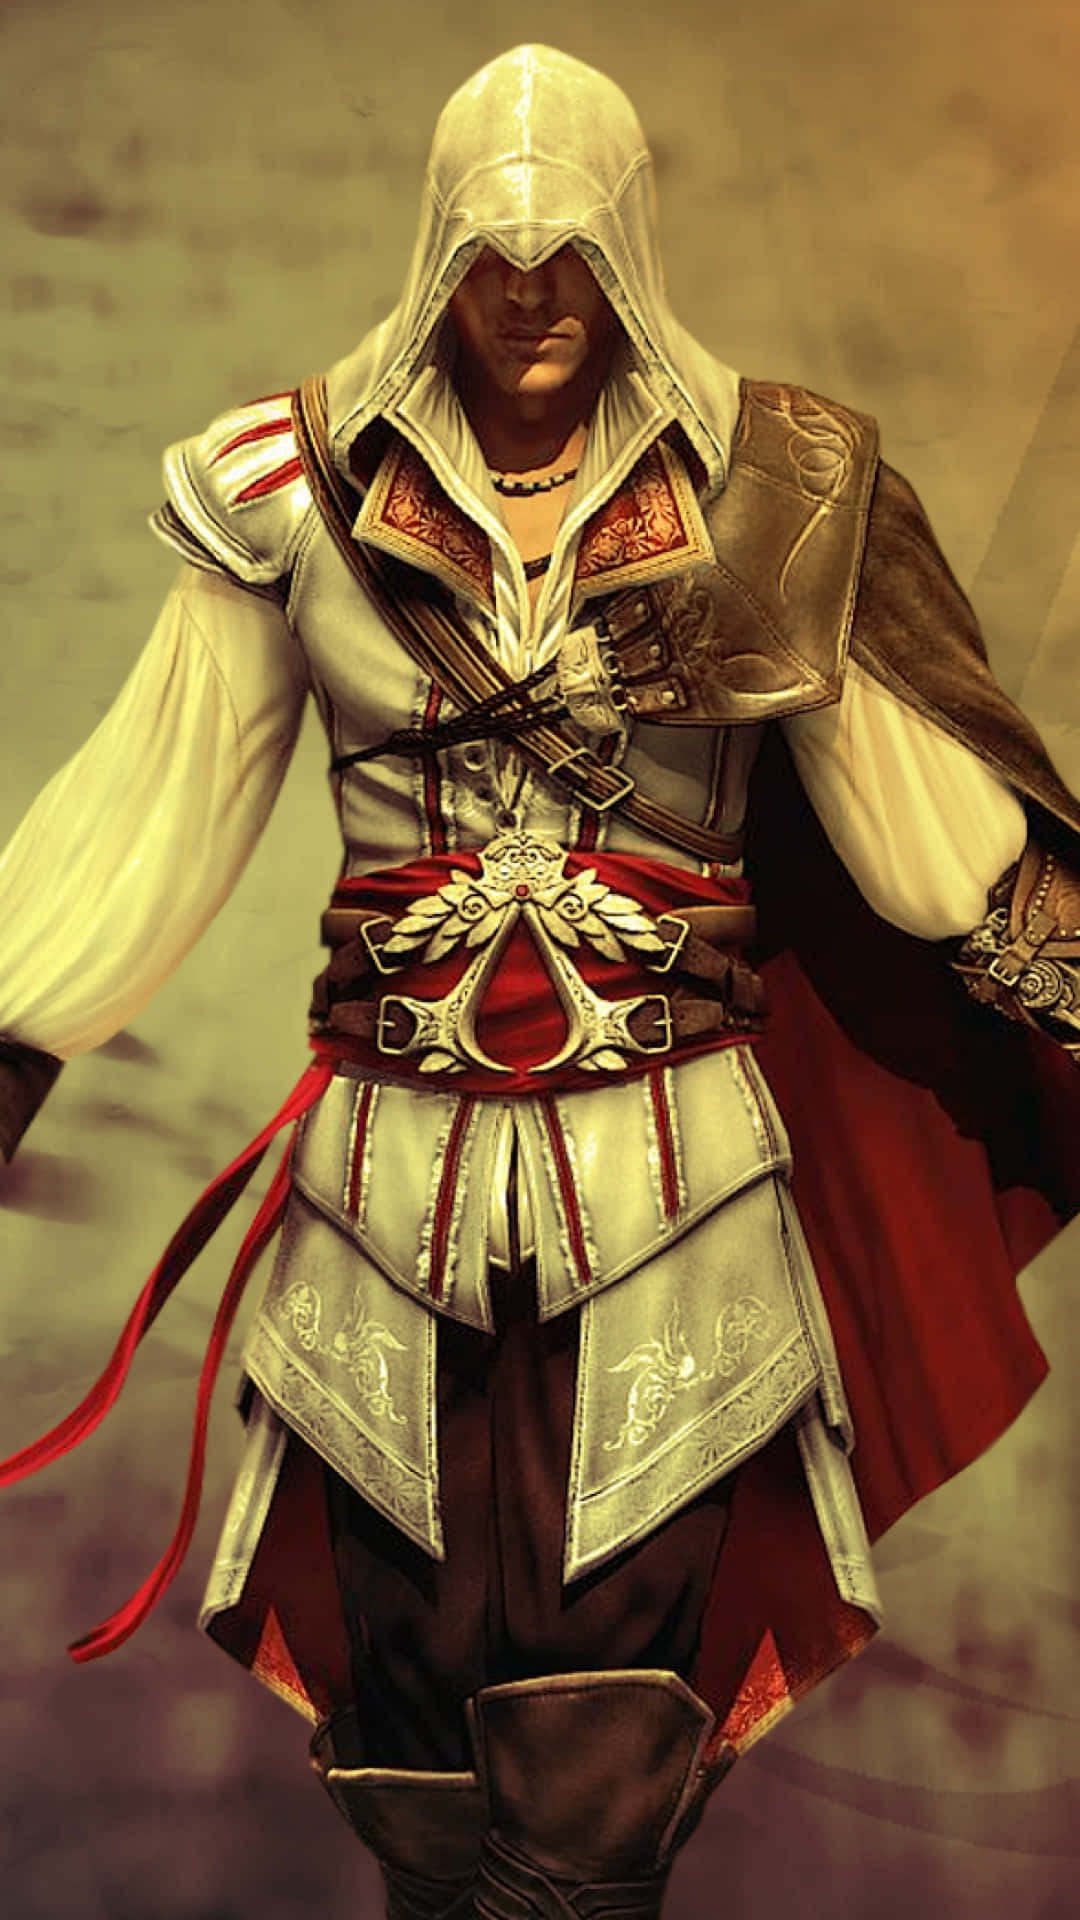 "The assassin is ready, with his Assassin's Creed on iPhone" Wallpaper